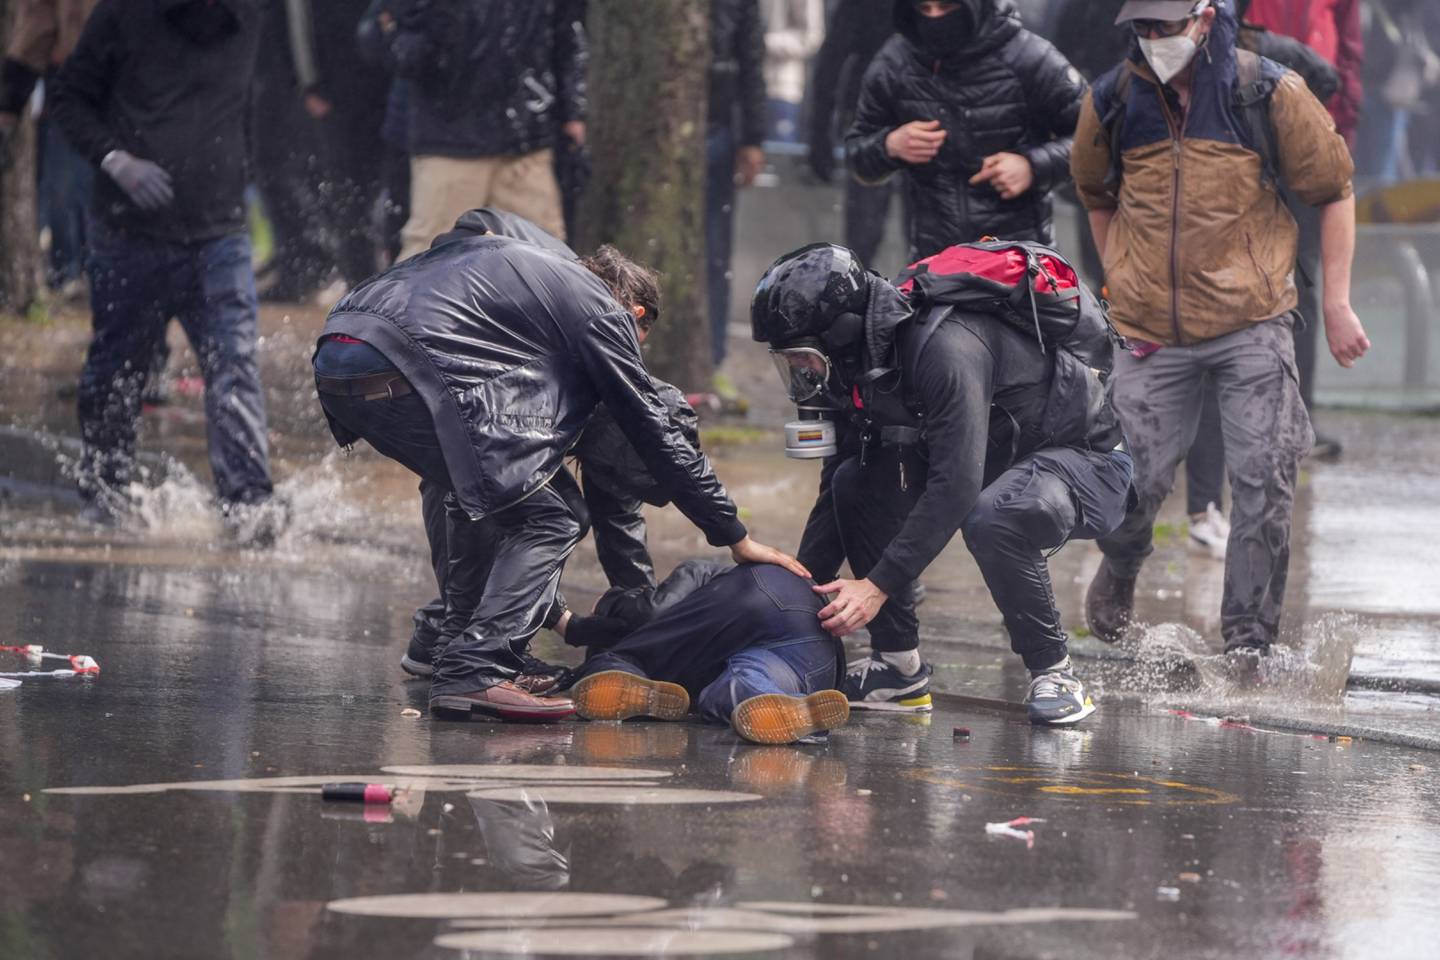 Protesters assist a person on the ground as water cannons are fired to disperse crowds during a demonstration against pension reform in central Paris, France, on Monday, May 1, 2023. Photographer: Nathan Laine/Bloombergdfd